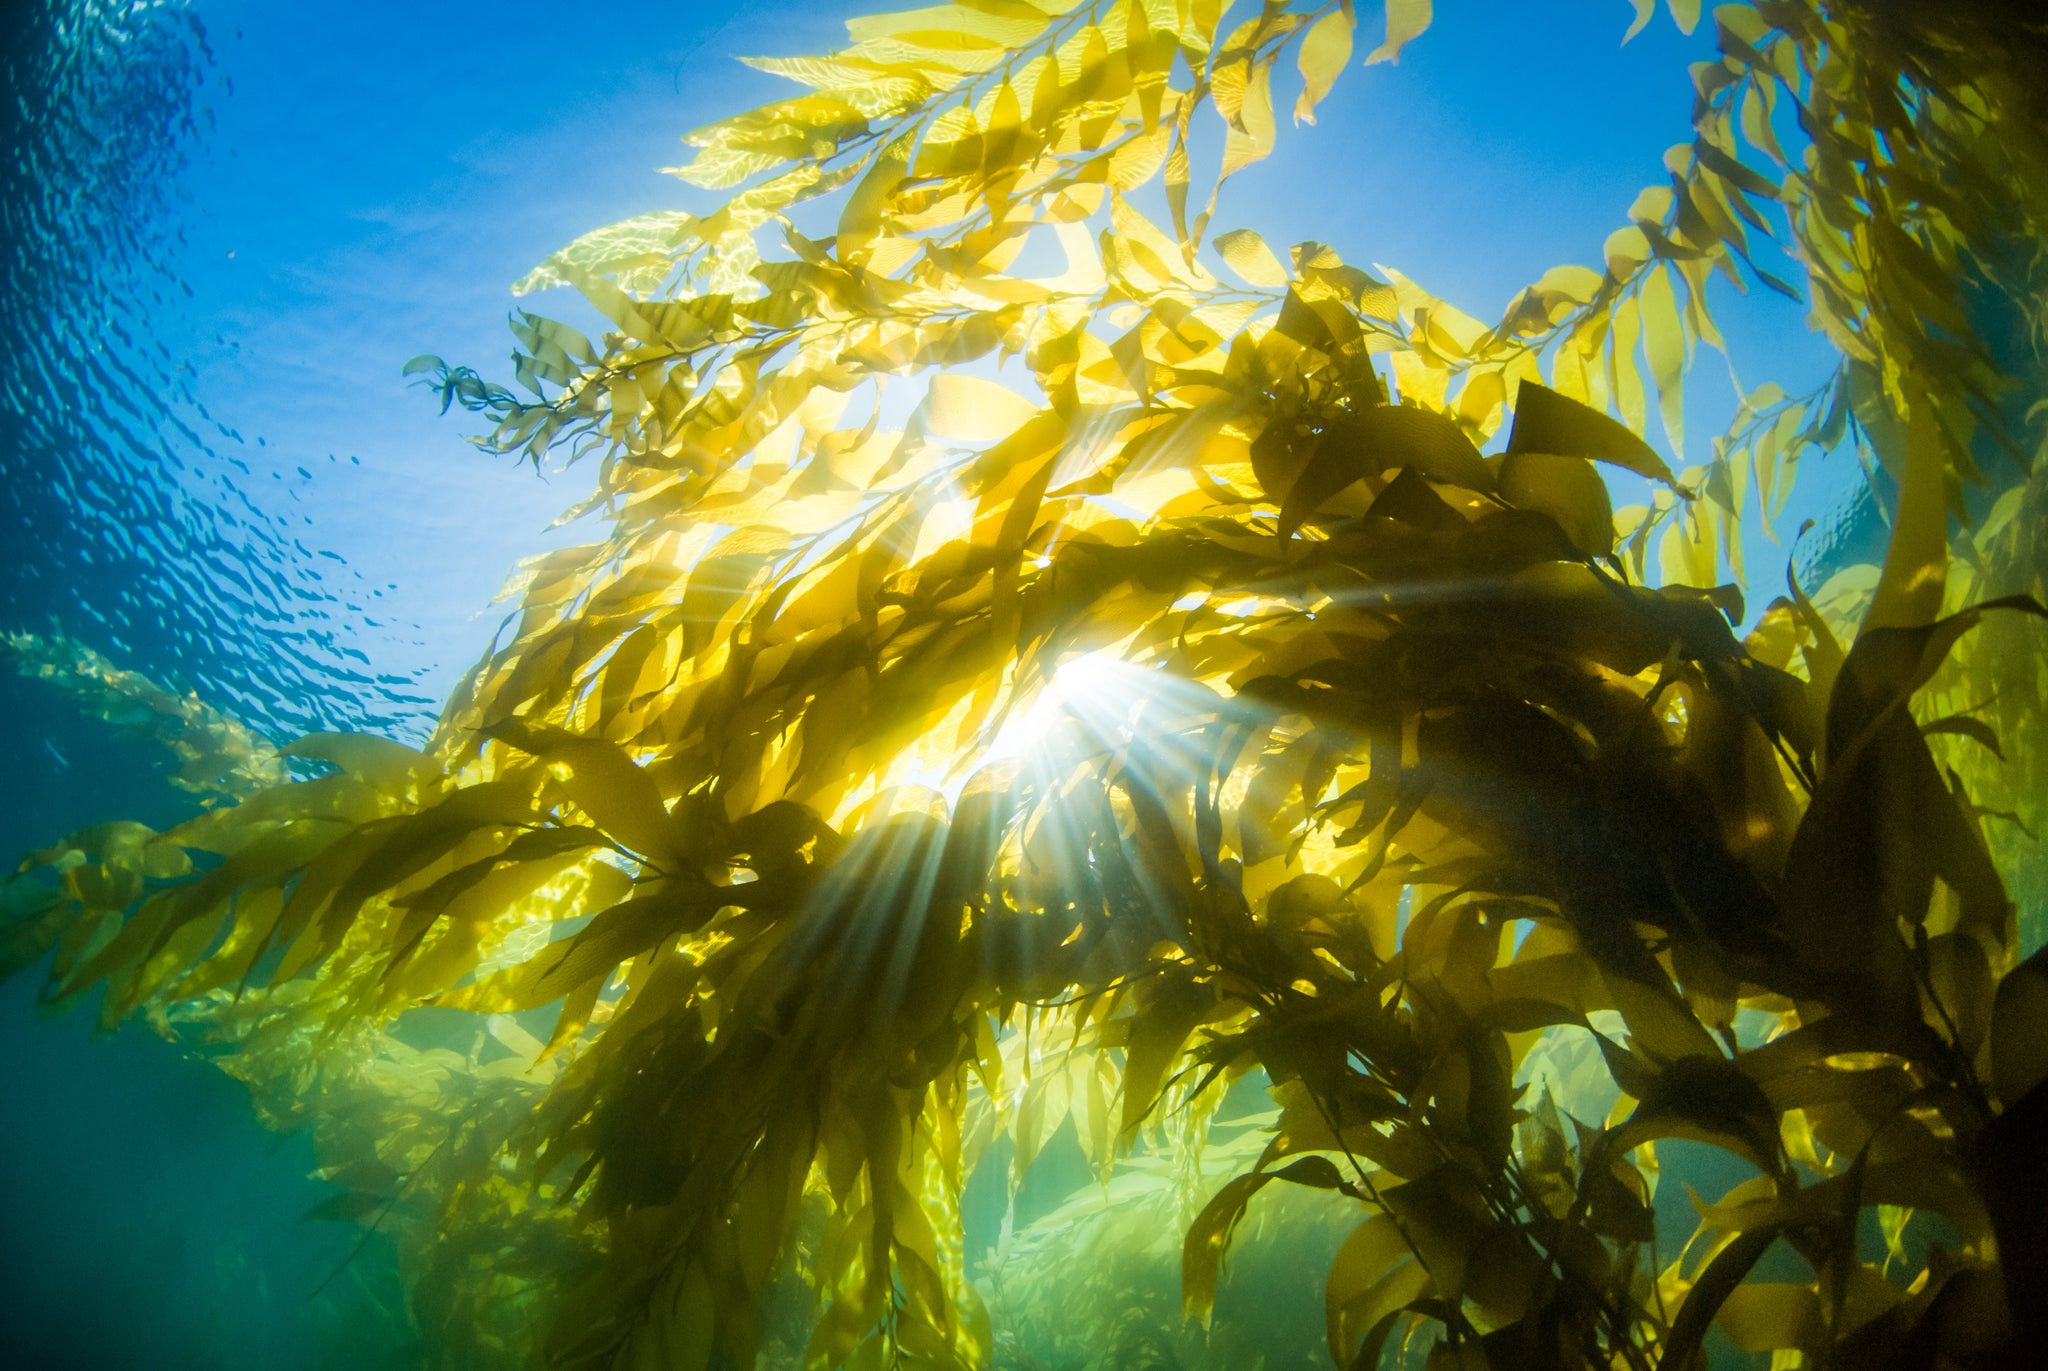 Kelp Reforestation: Why we all need to kelp out